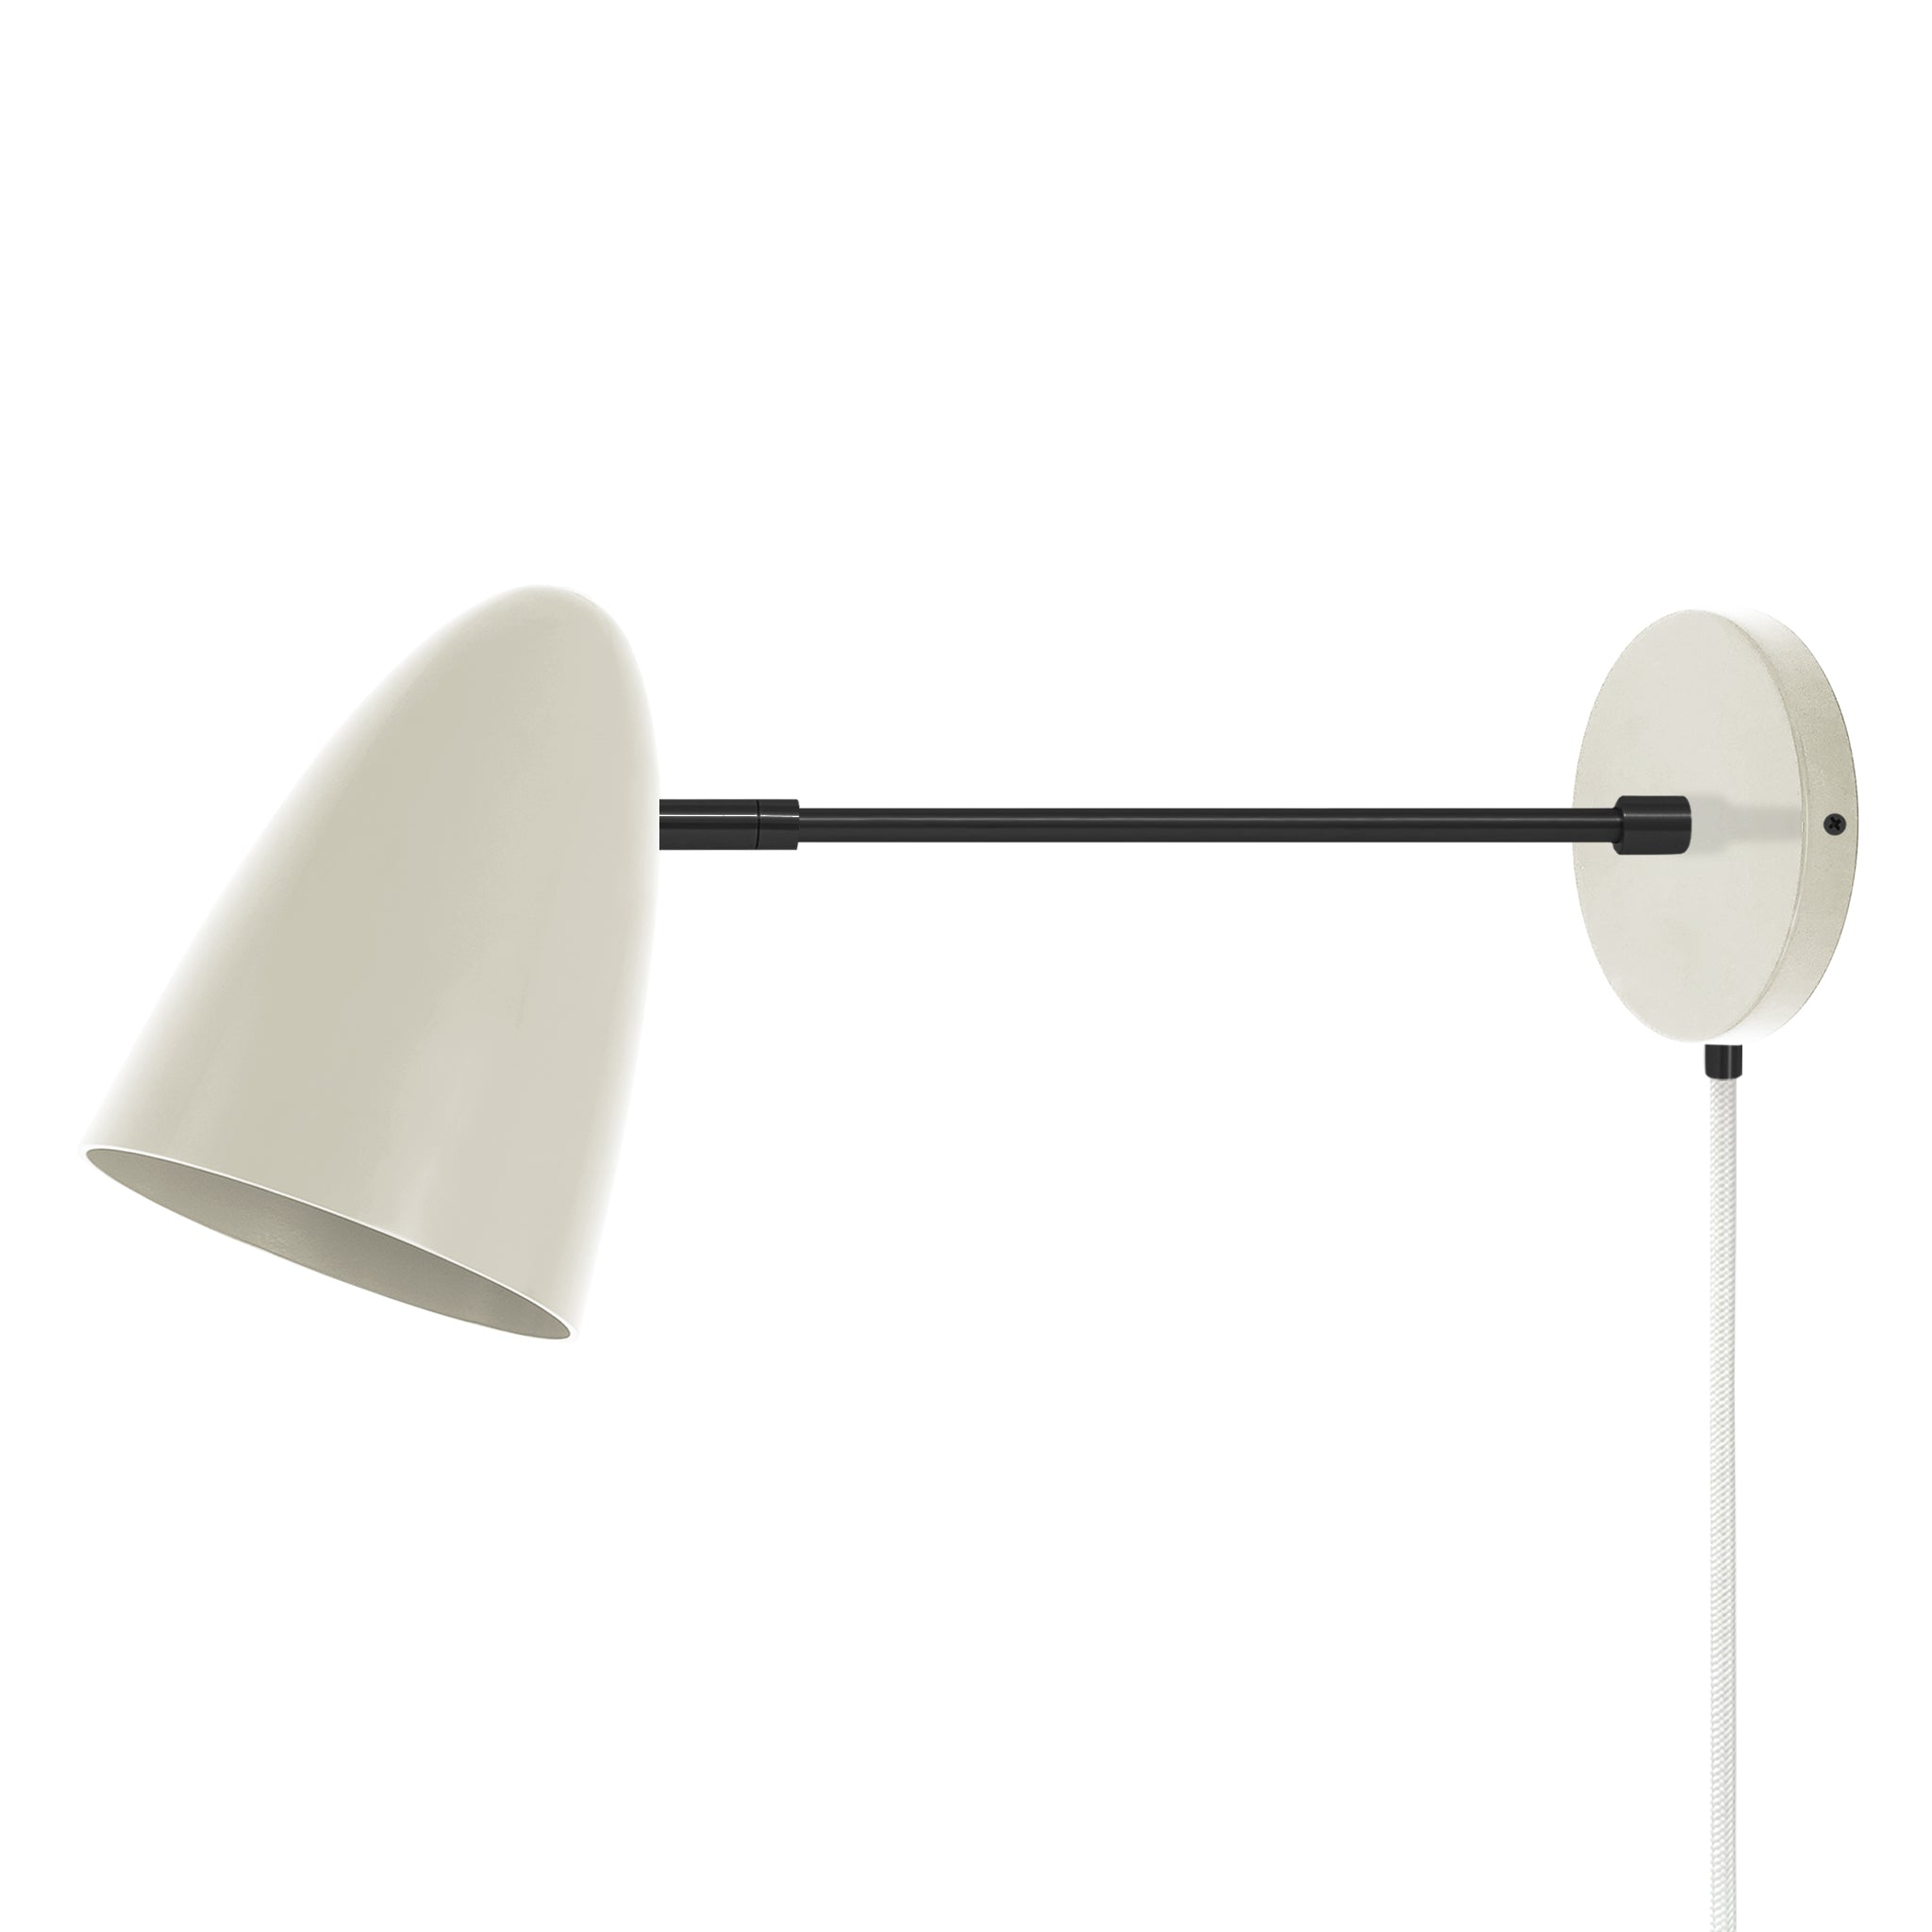 Black and bone color Boom plug-in sconce 10" arm Dutton Brown lighting